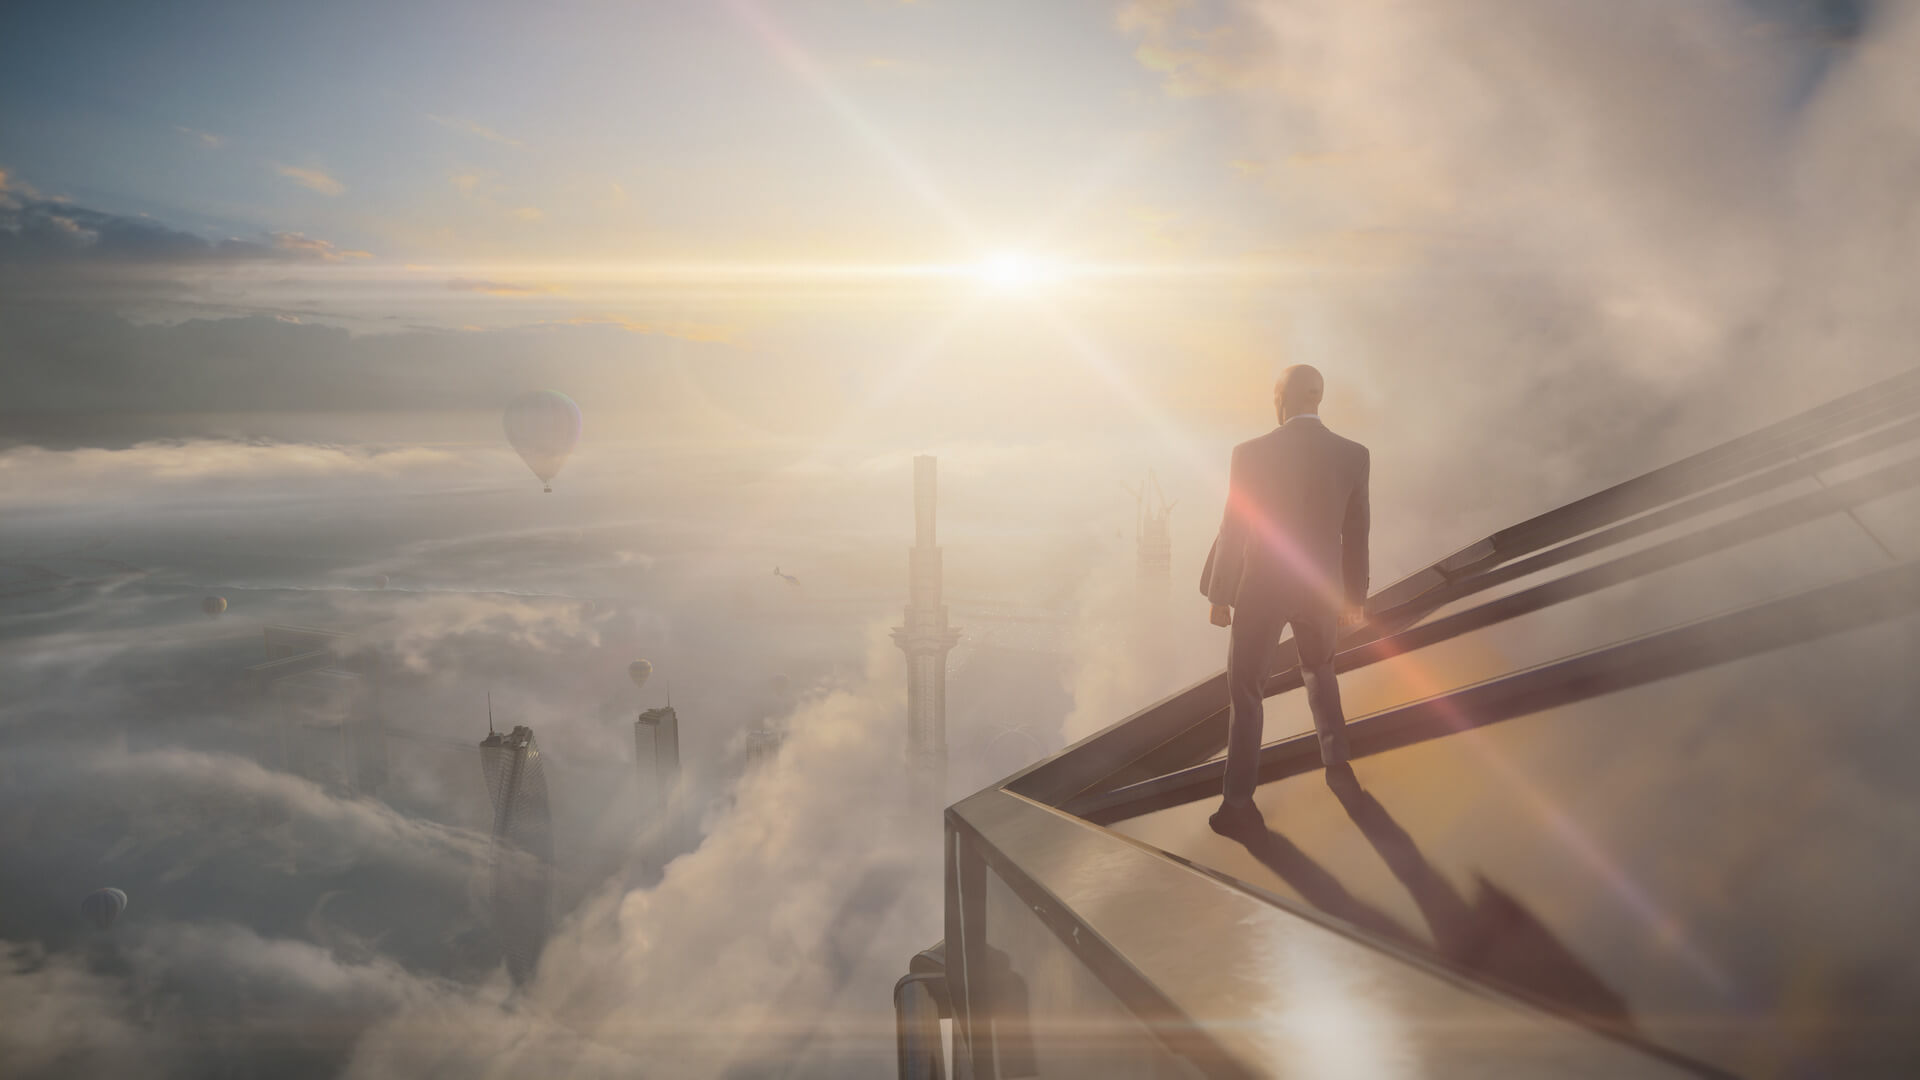 Agent 47 hanging out on top of a skyscraper